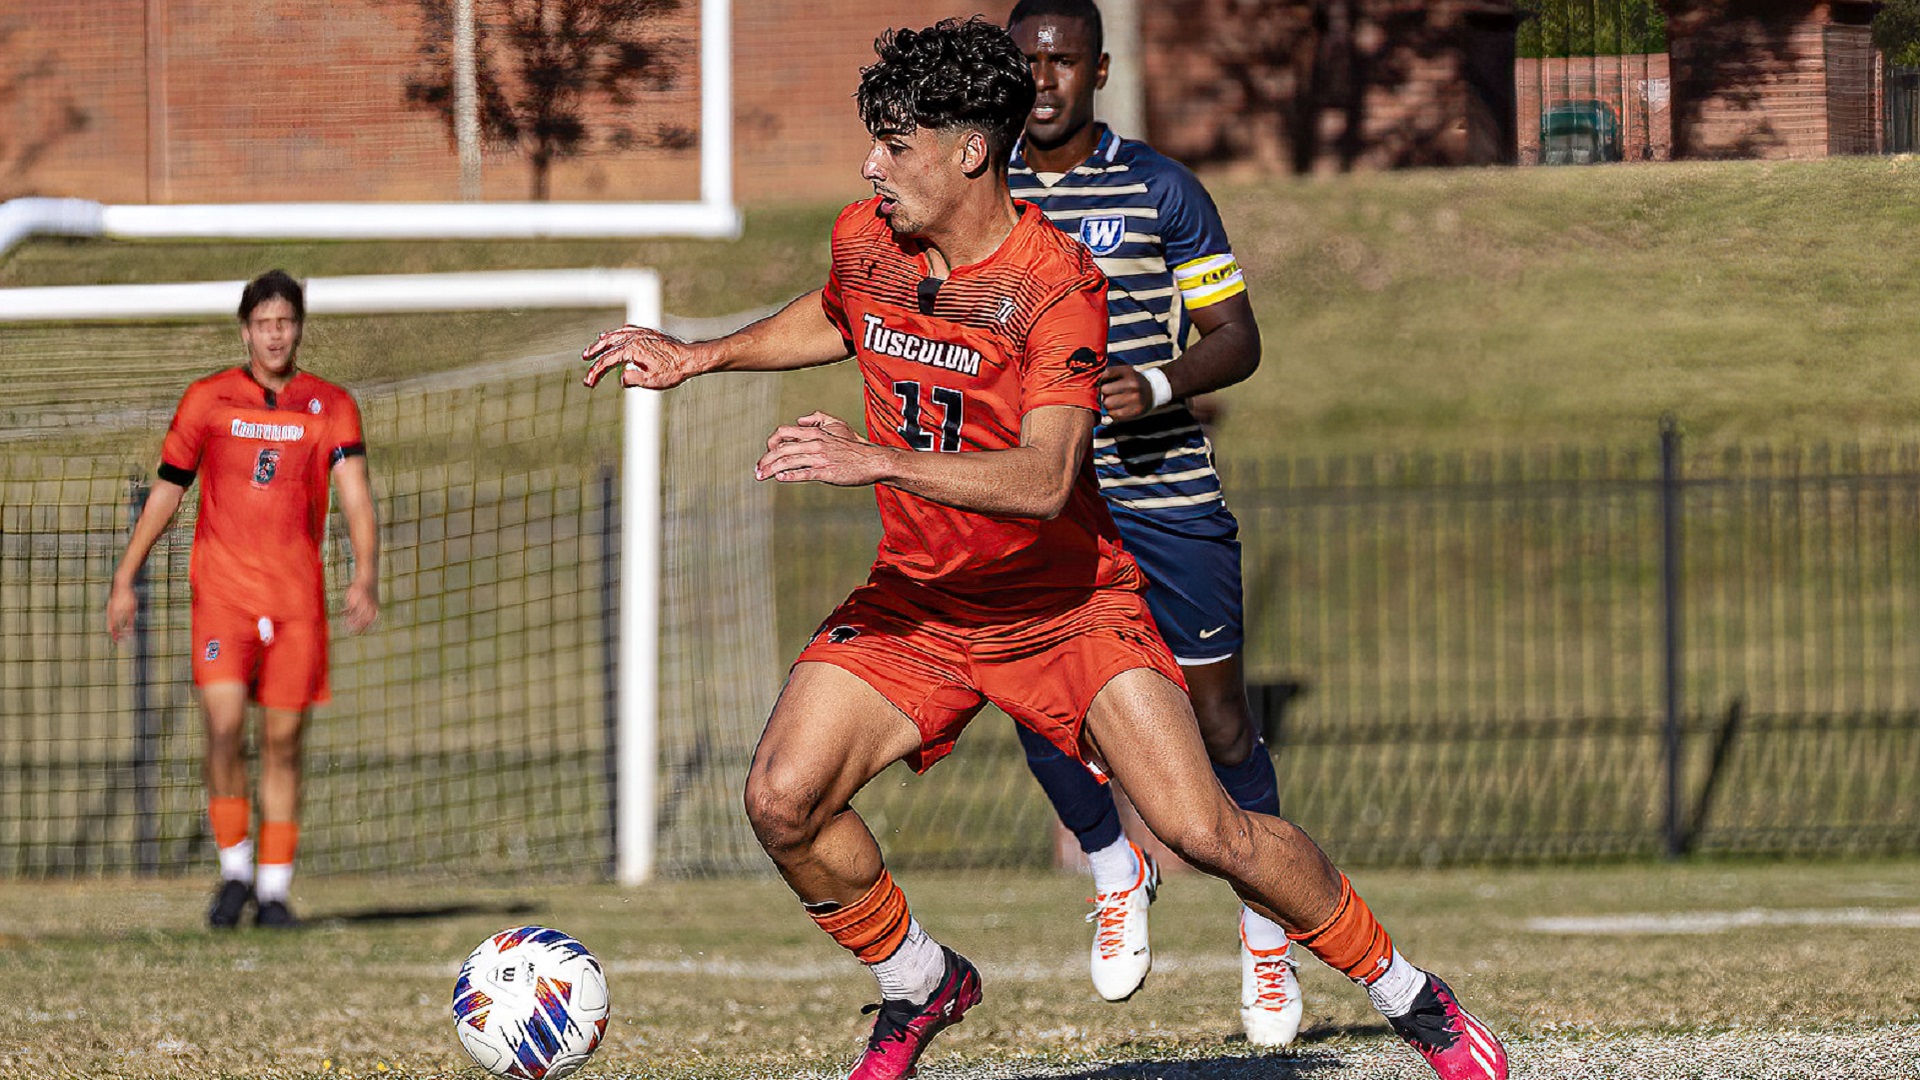 Artur Marques scored his fifth goal of the season against Wingate (photo by Chuck Williams)